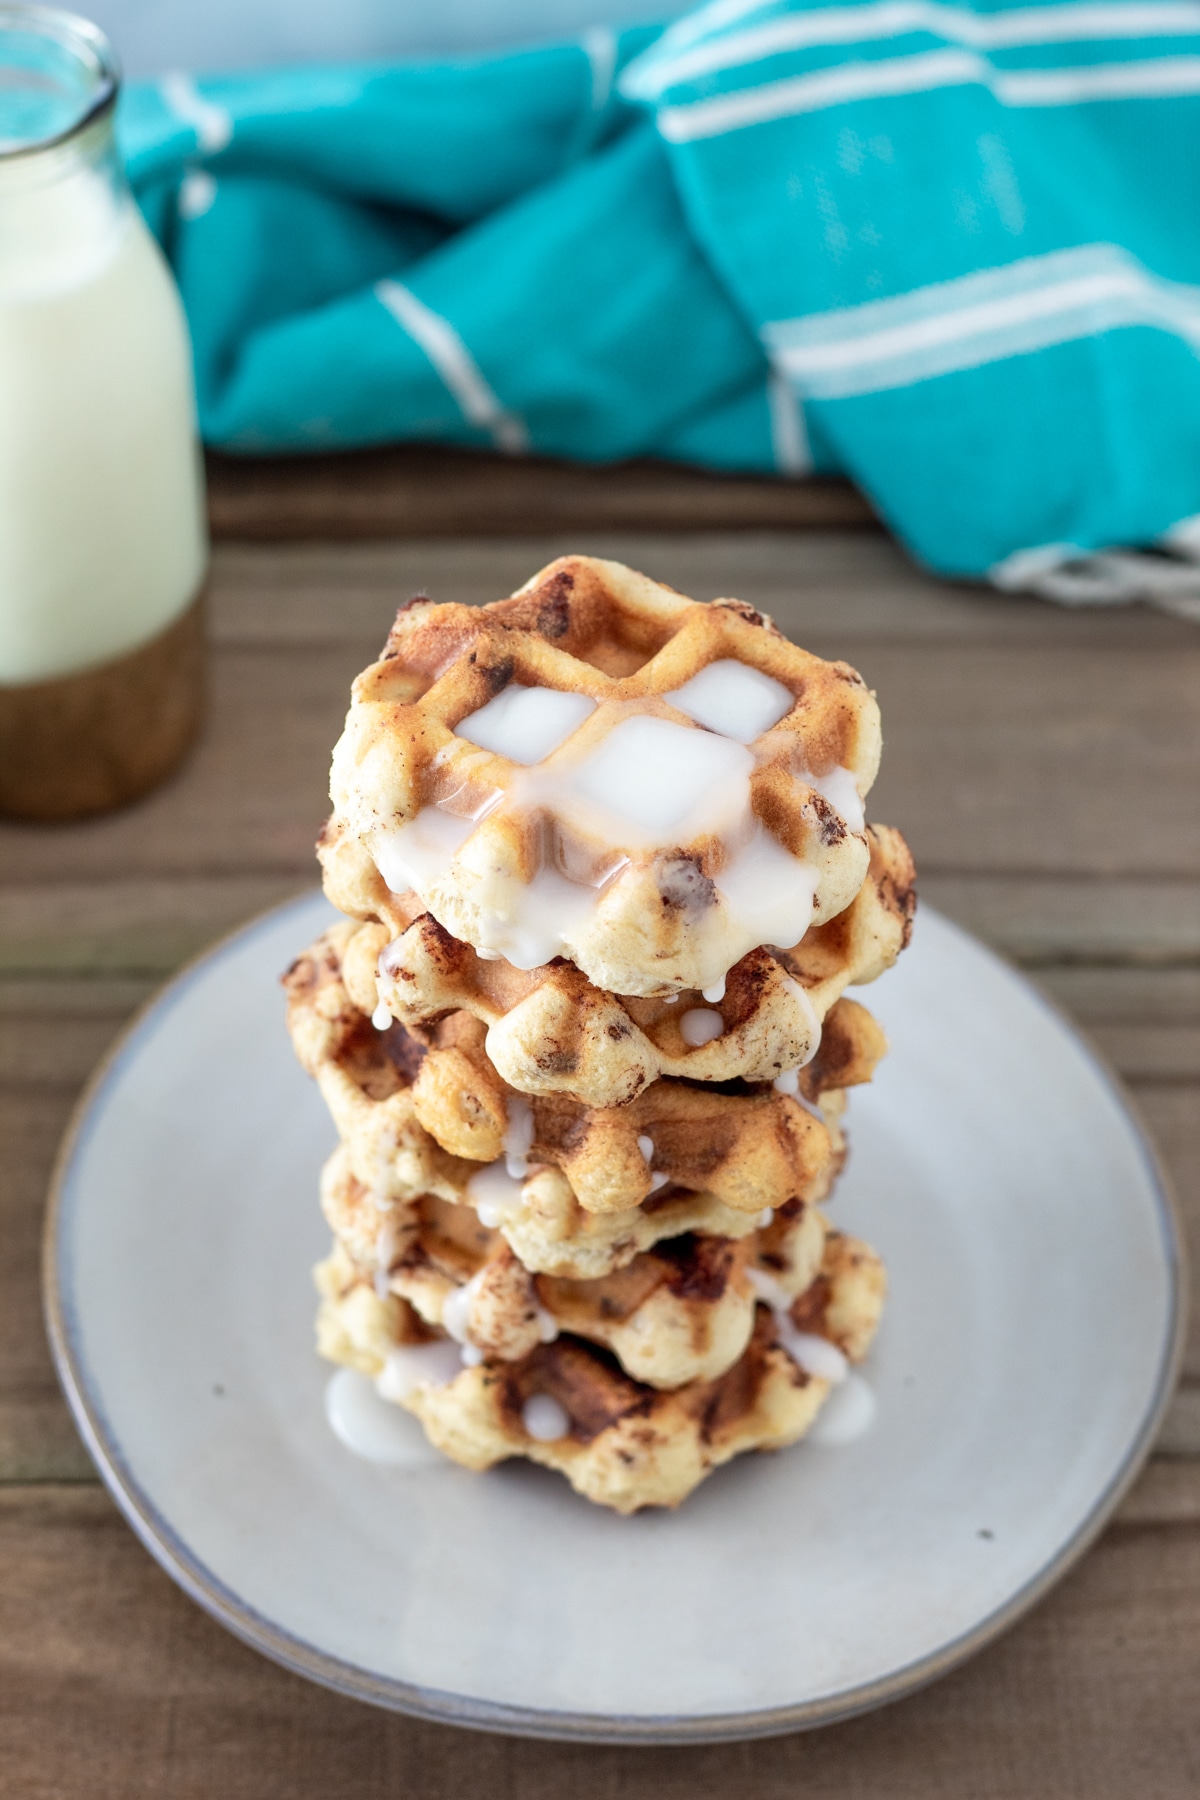 A white plate stacked with Cinnamon Roll Waffles topped with icing. A blue towel and a glass of milk are in the background